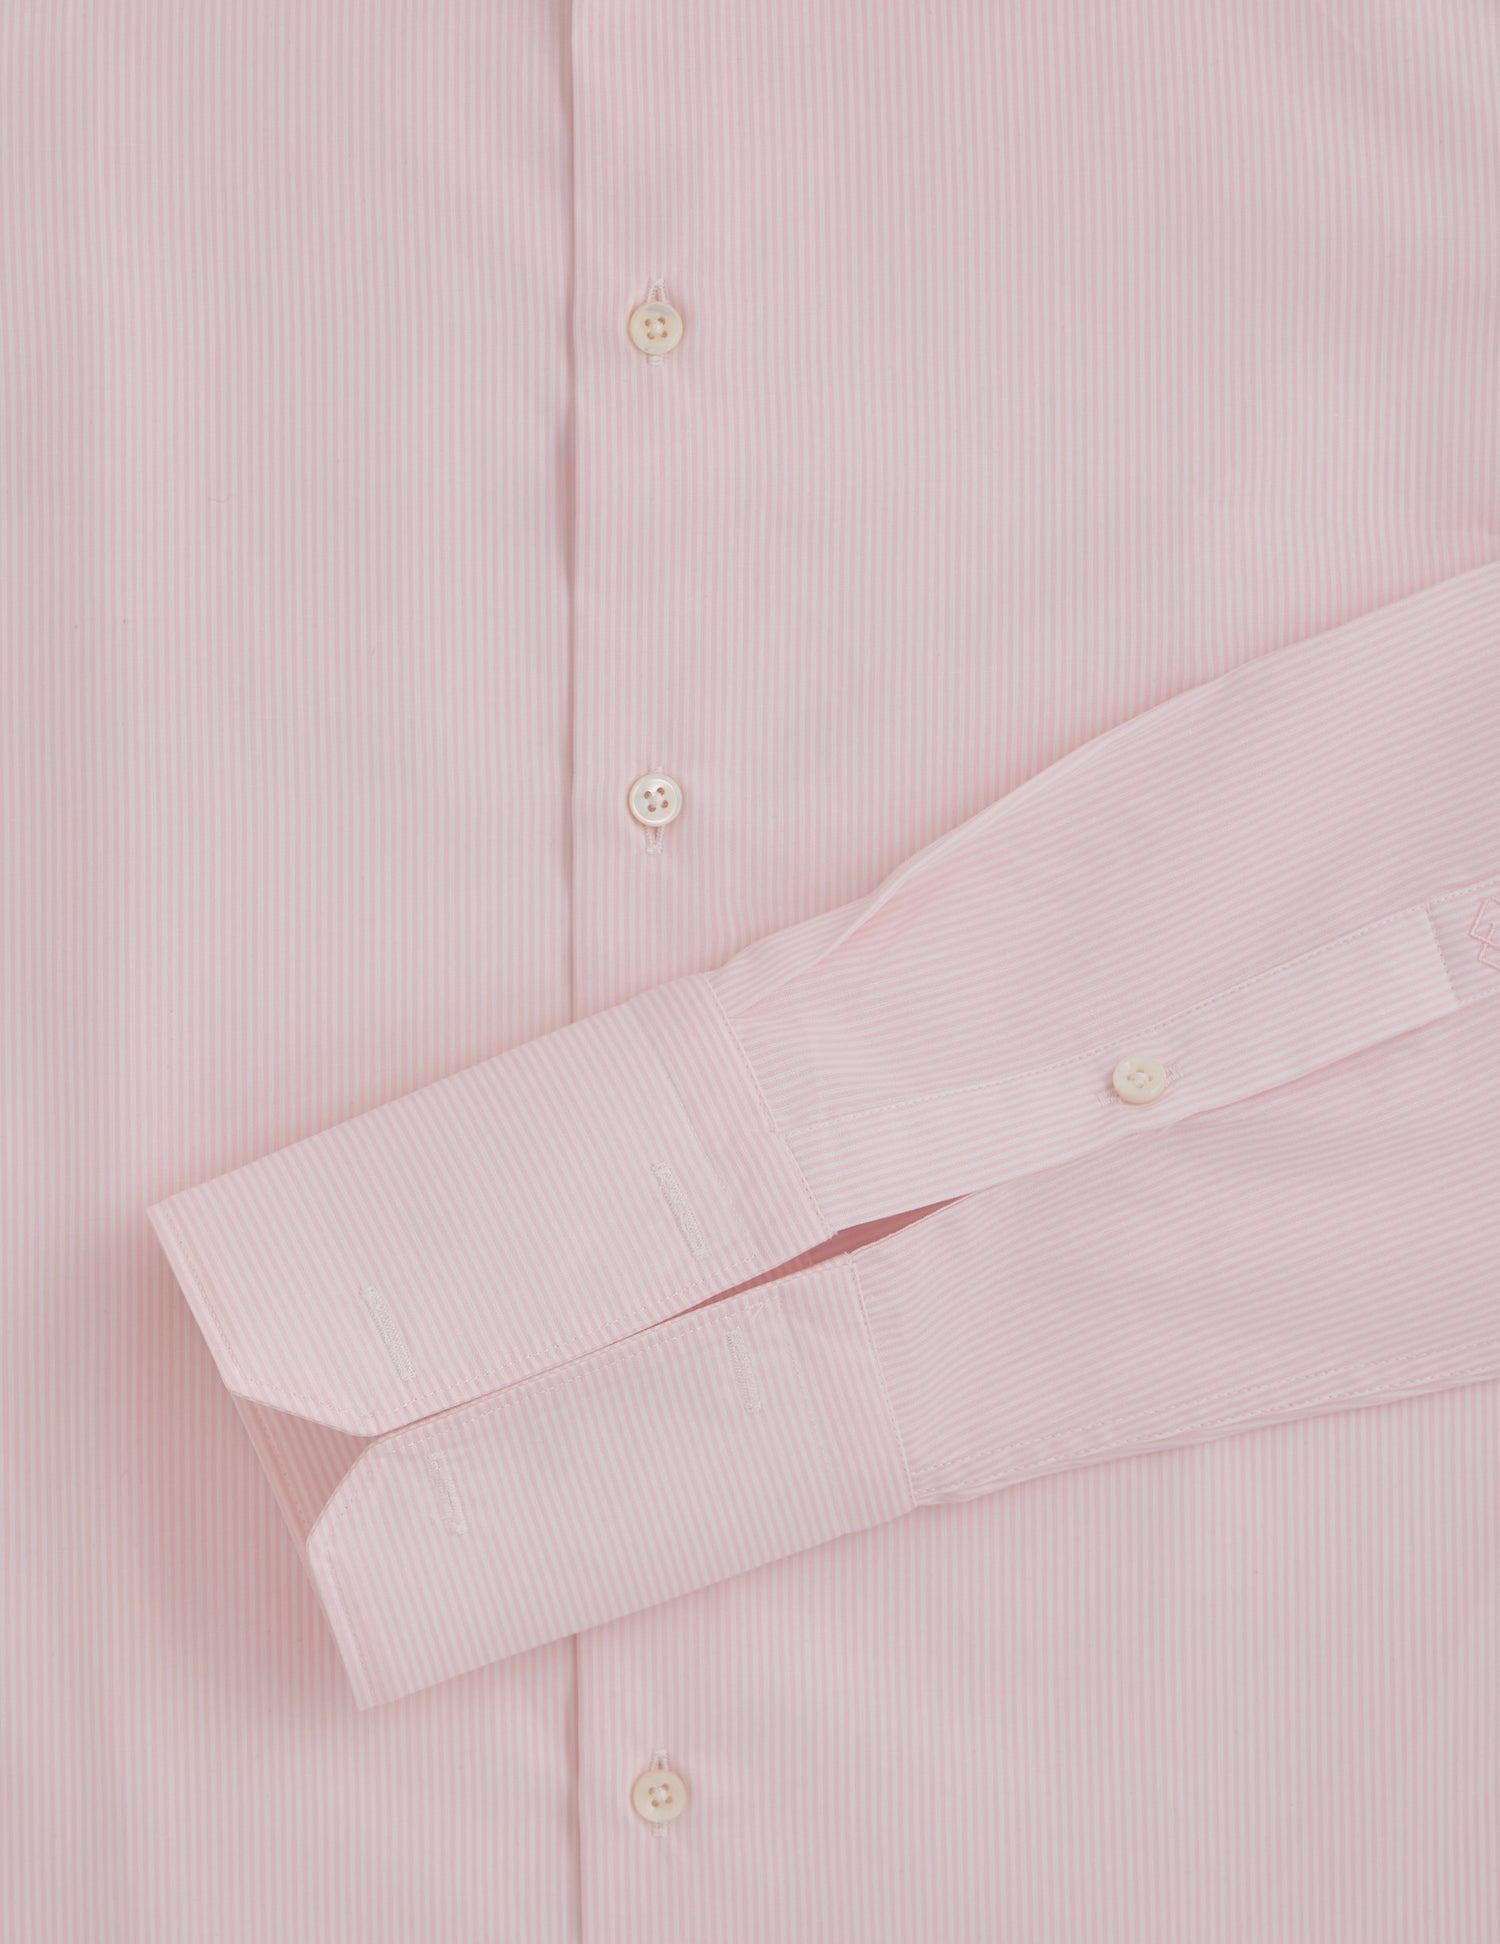 Semi-fitted pink striped shirt - Poplin - Figaret Collar - Musketeers Cuffs#2